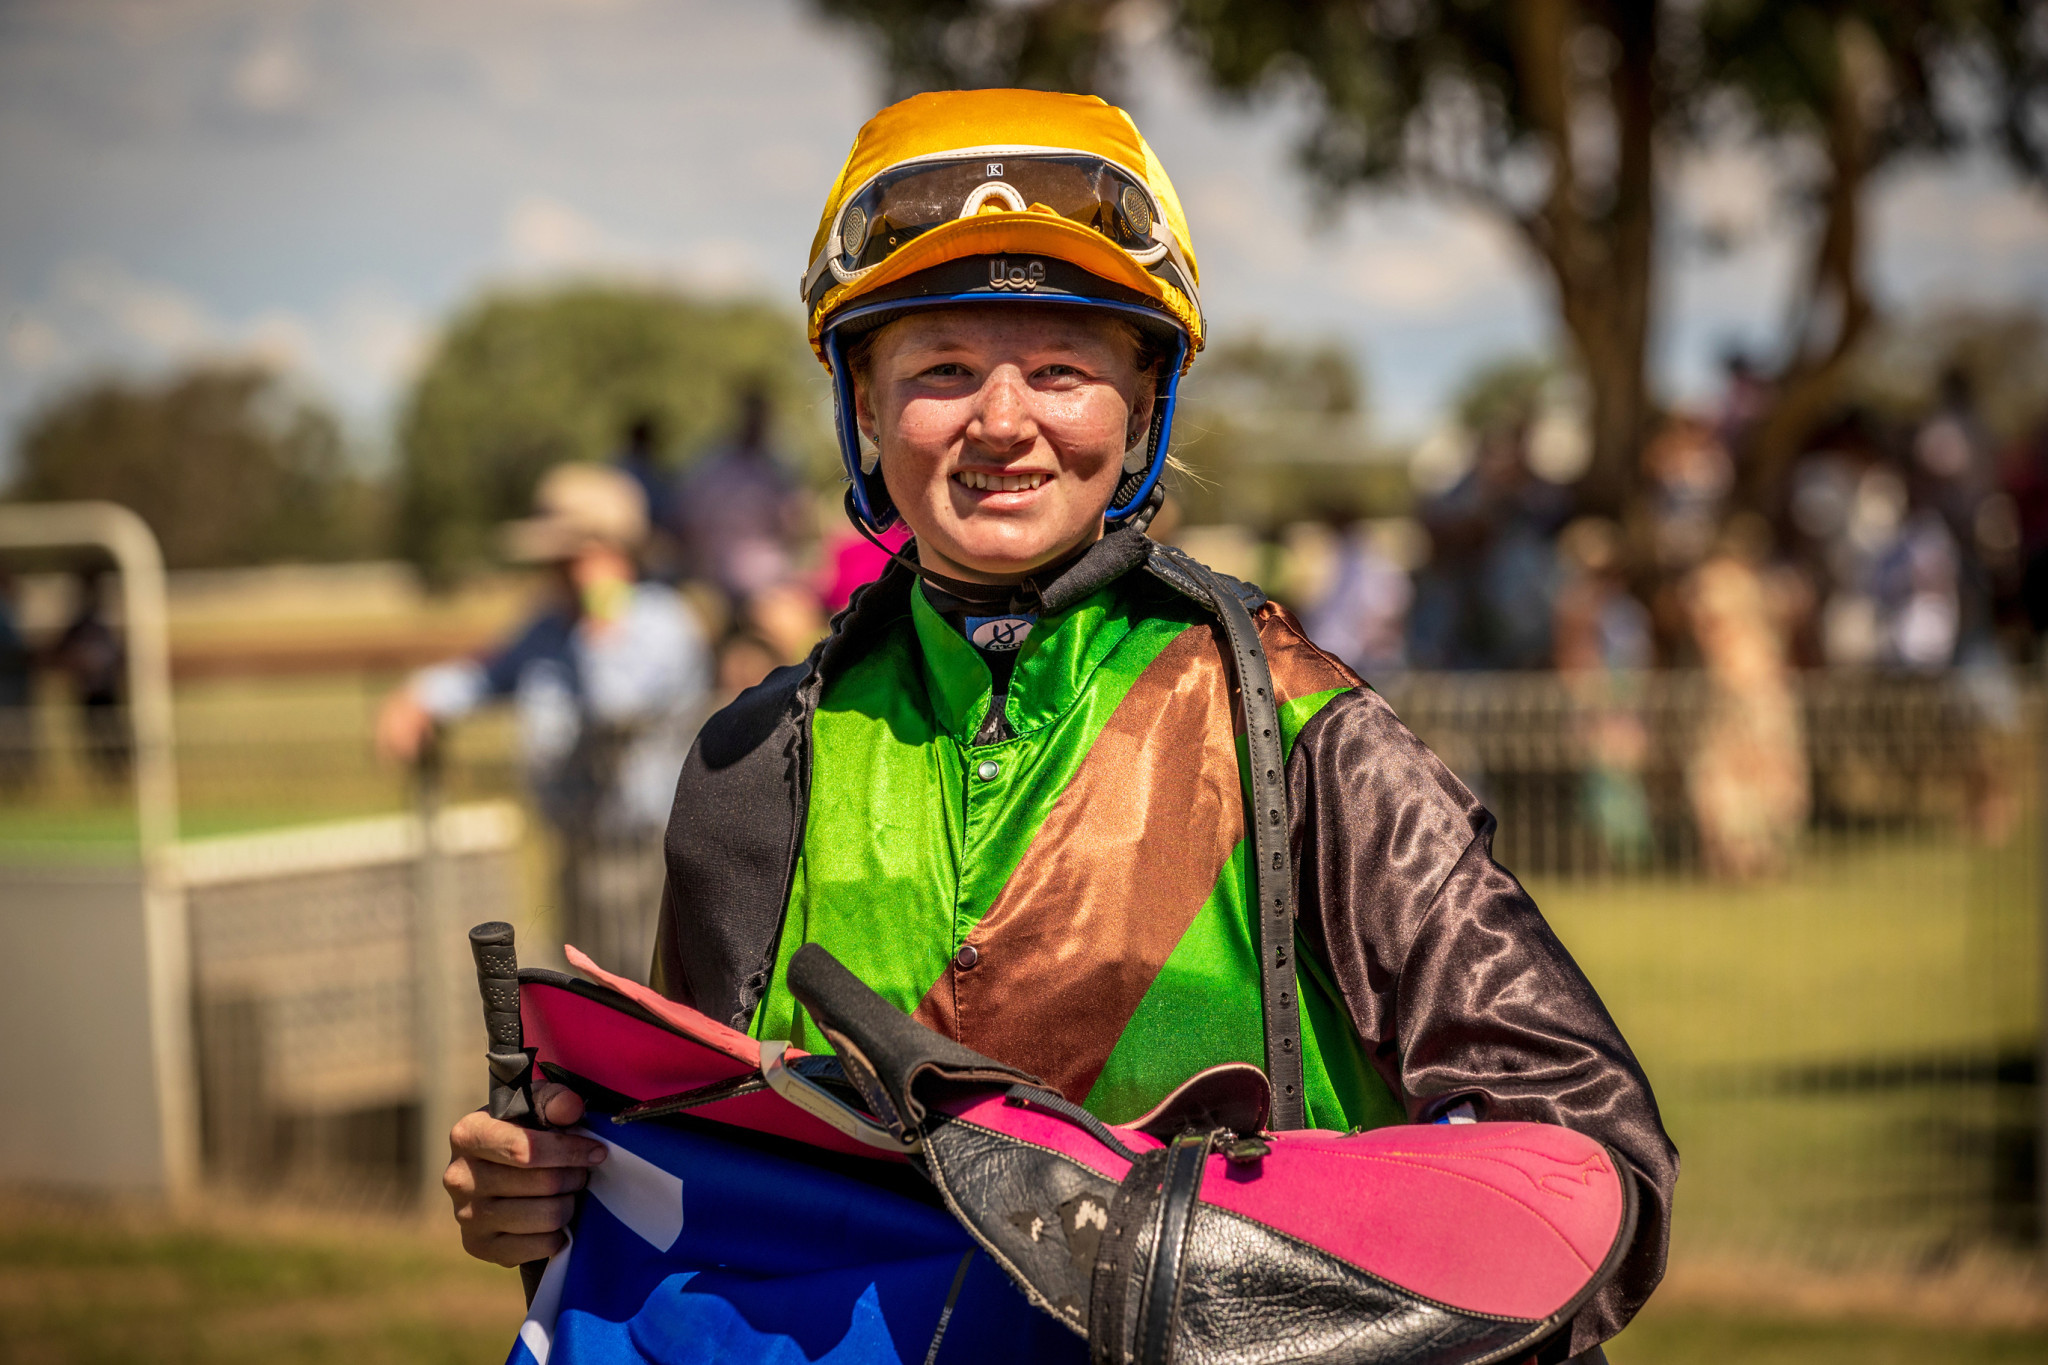 Gilgandra jockey Zara Lewis (pictured at February’s Condobolin Picnic meeting) rode a winning treble at the Tomingley Picnic Cup meeting. Photo courtesy of www.racingphotography.com.au